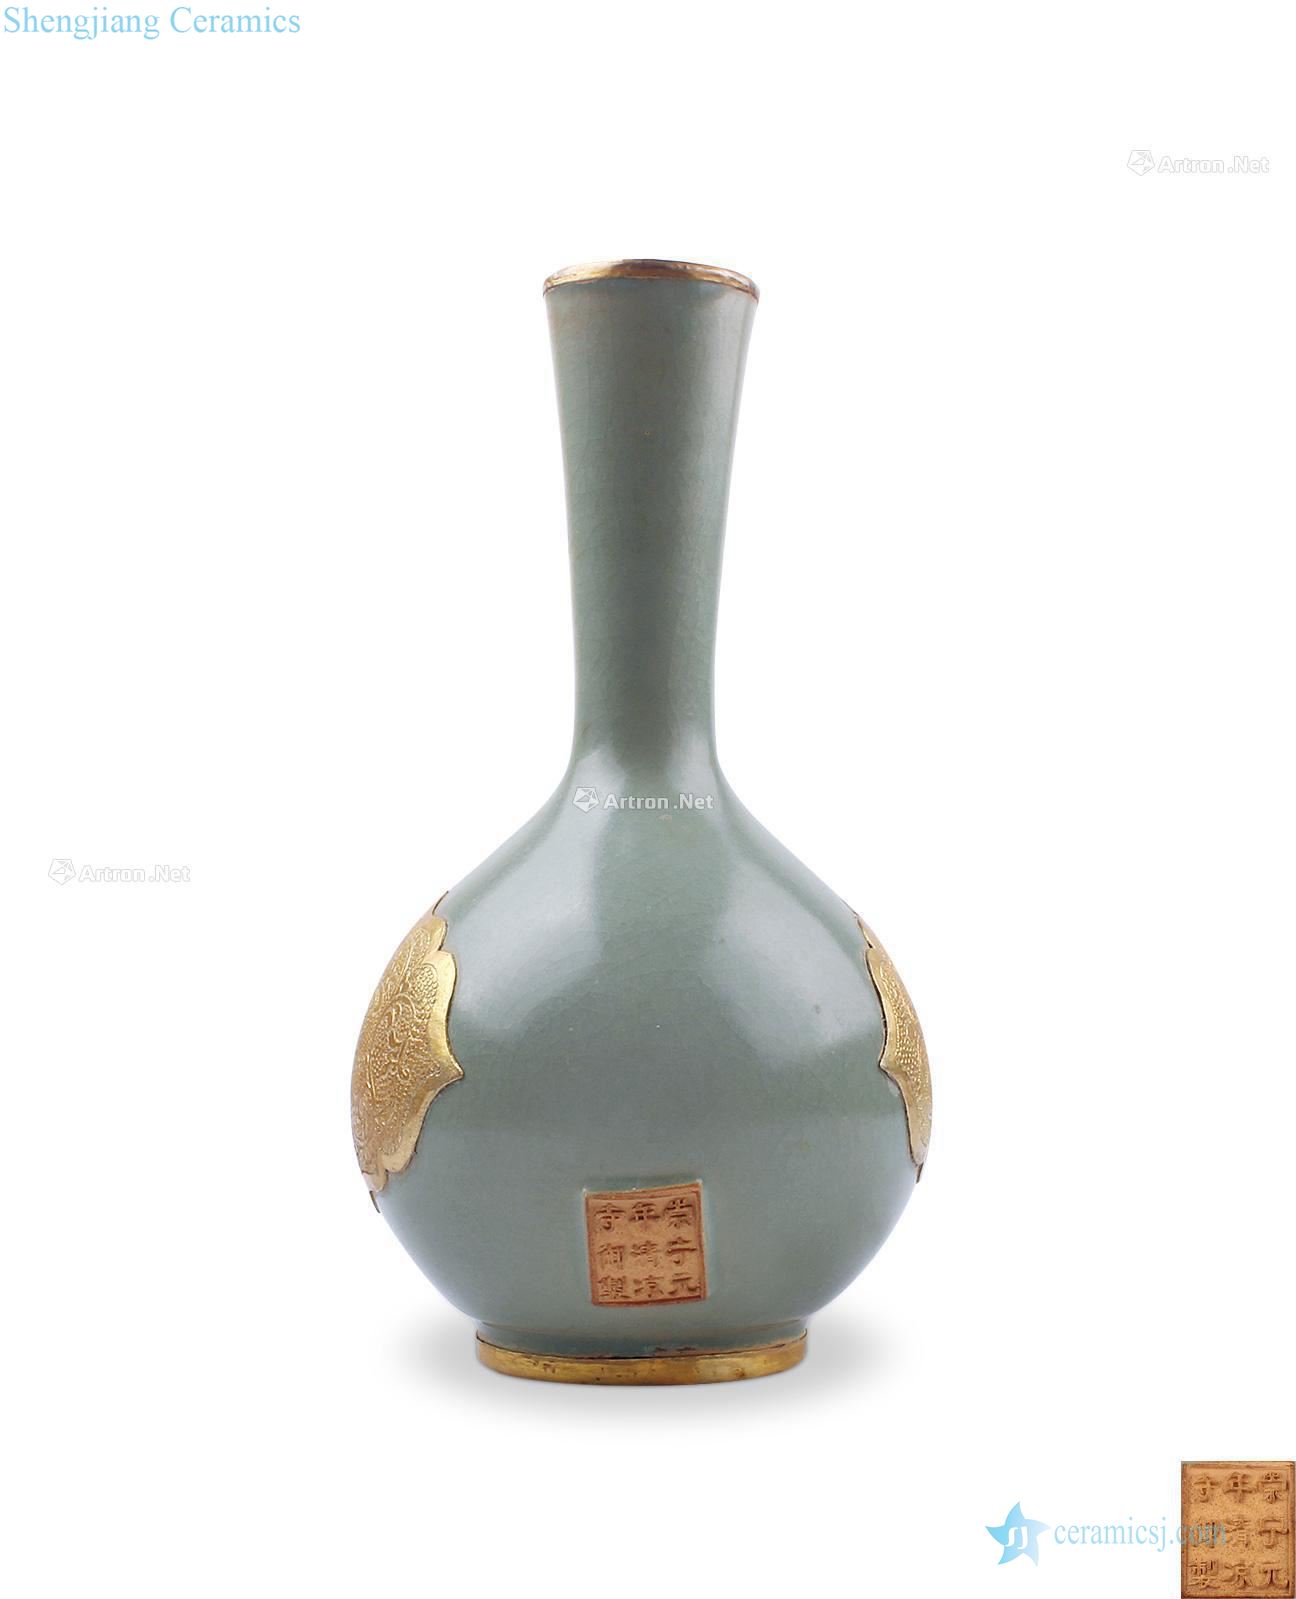 The song dynasty Your kiln flask